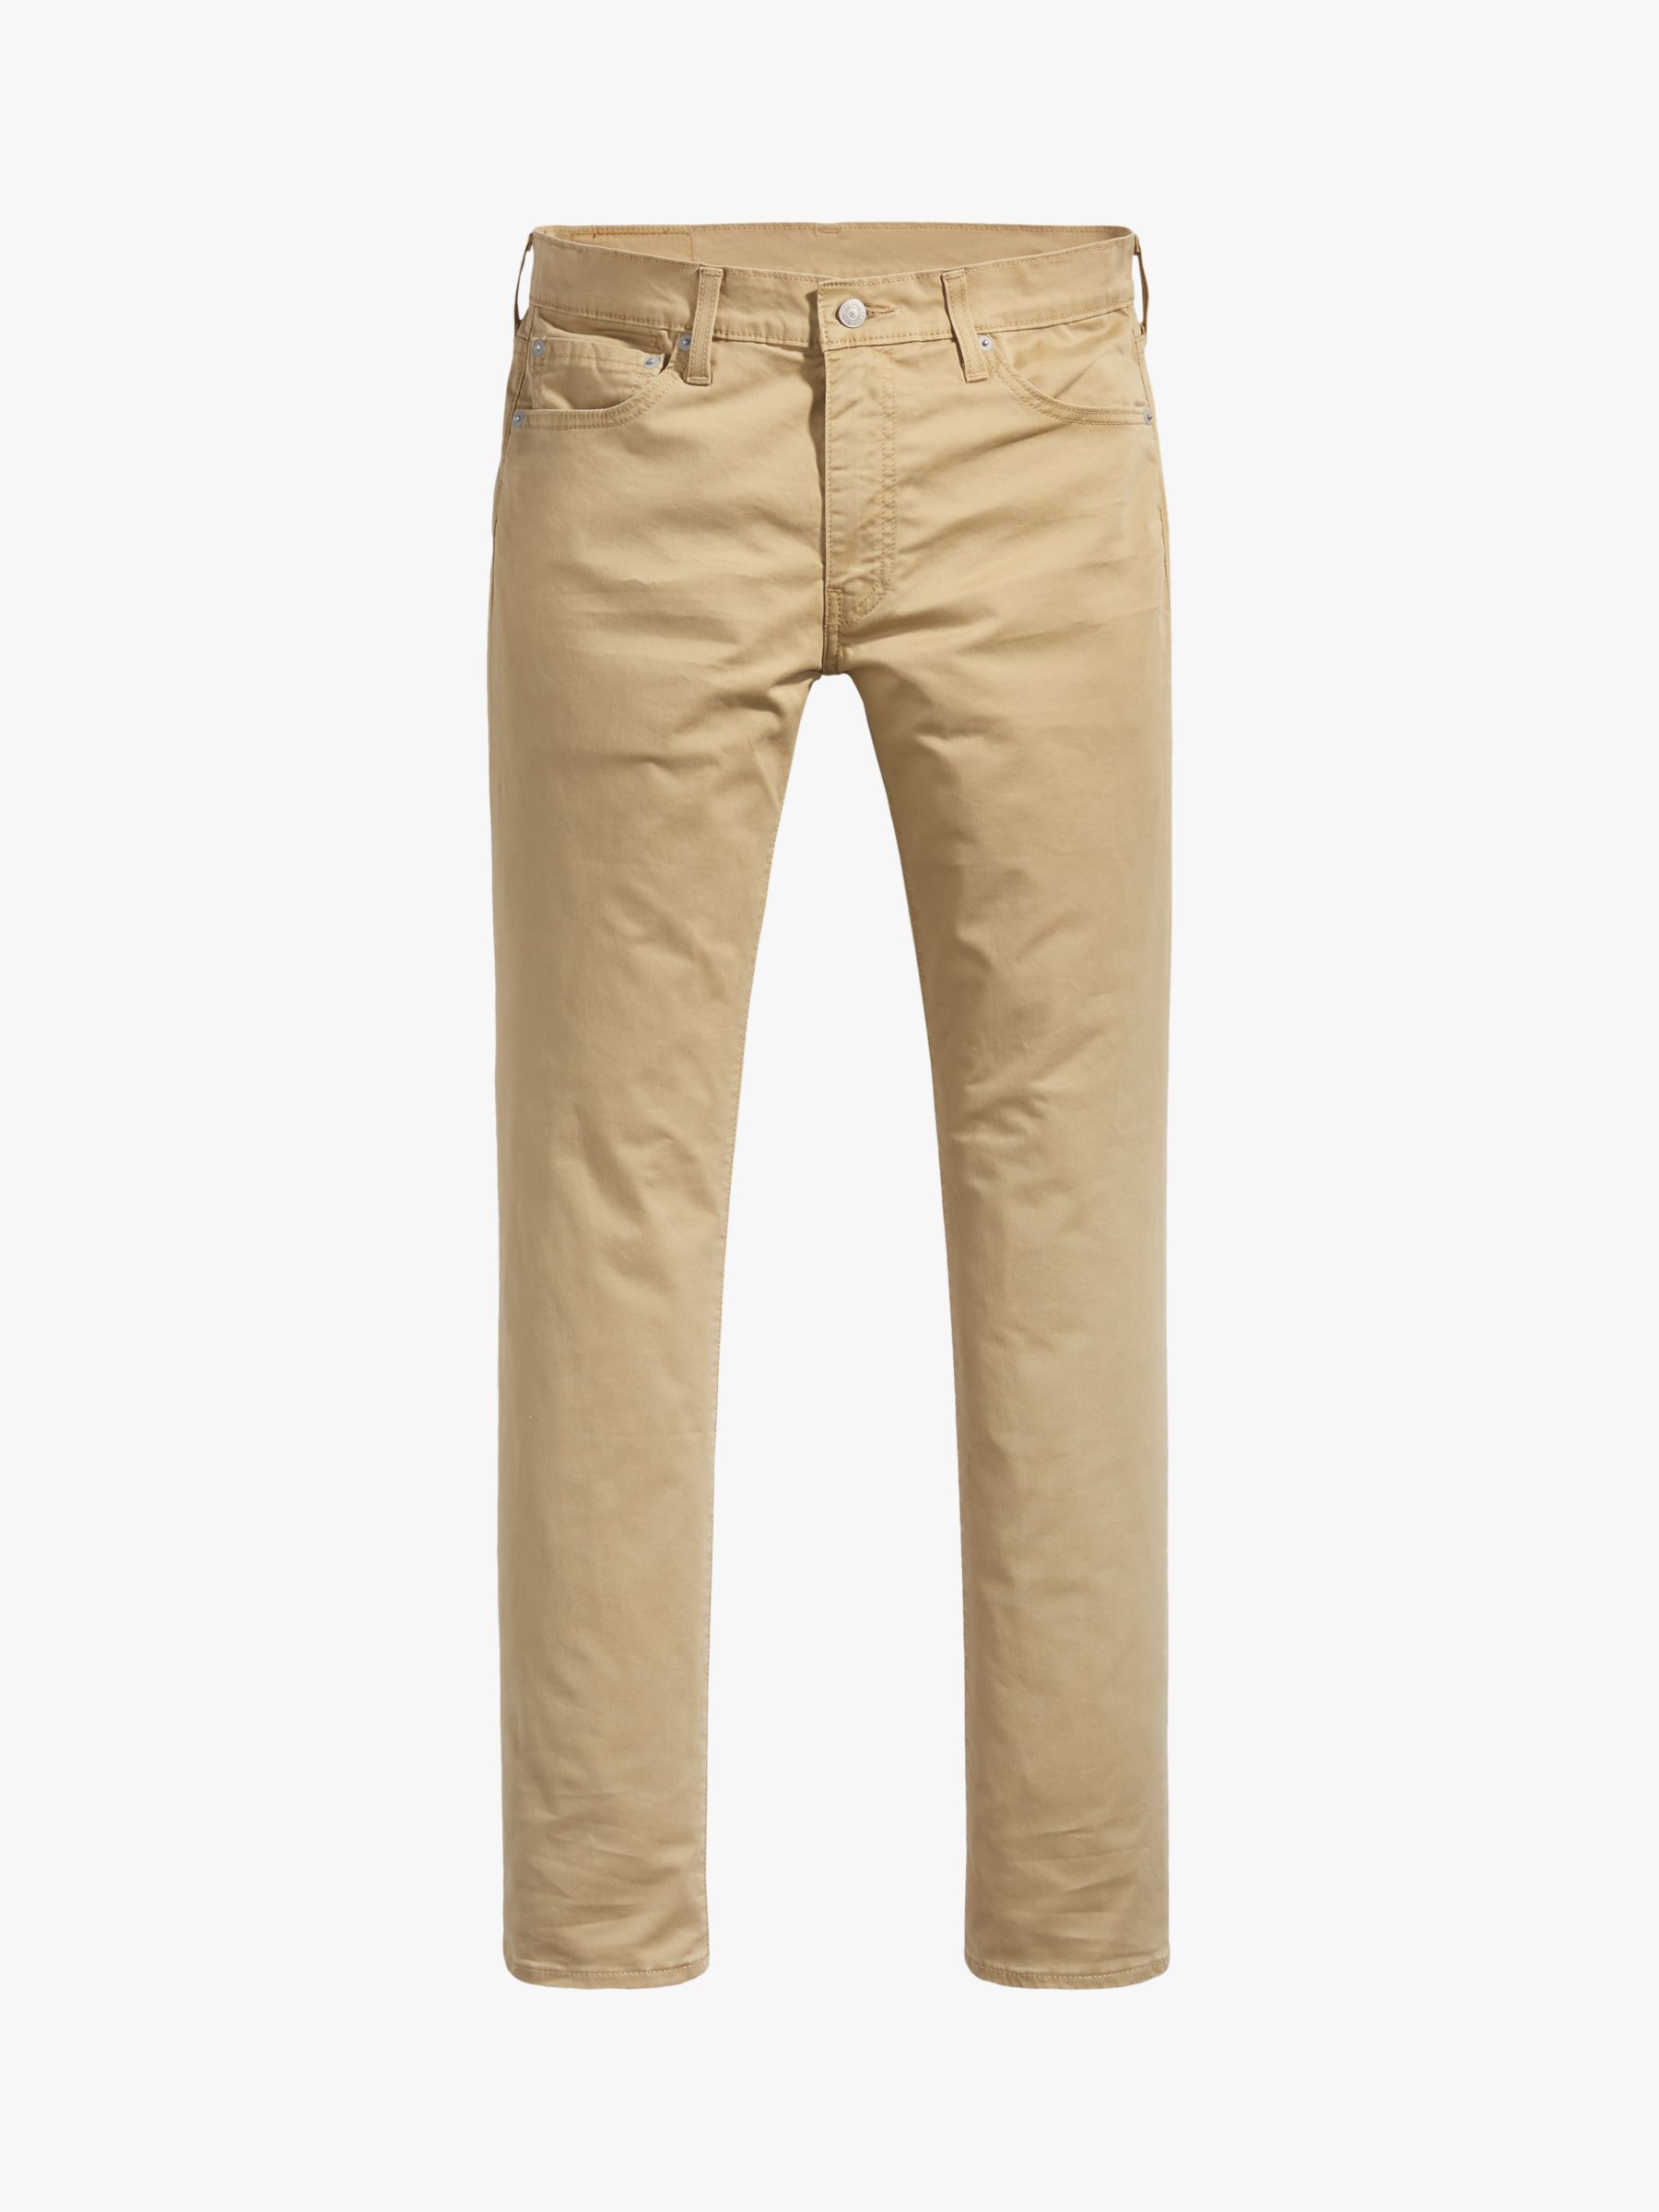 Levi's 511 Slim Fit Chinos, Harvest Gold Sueded, 30S